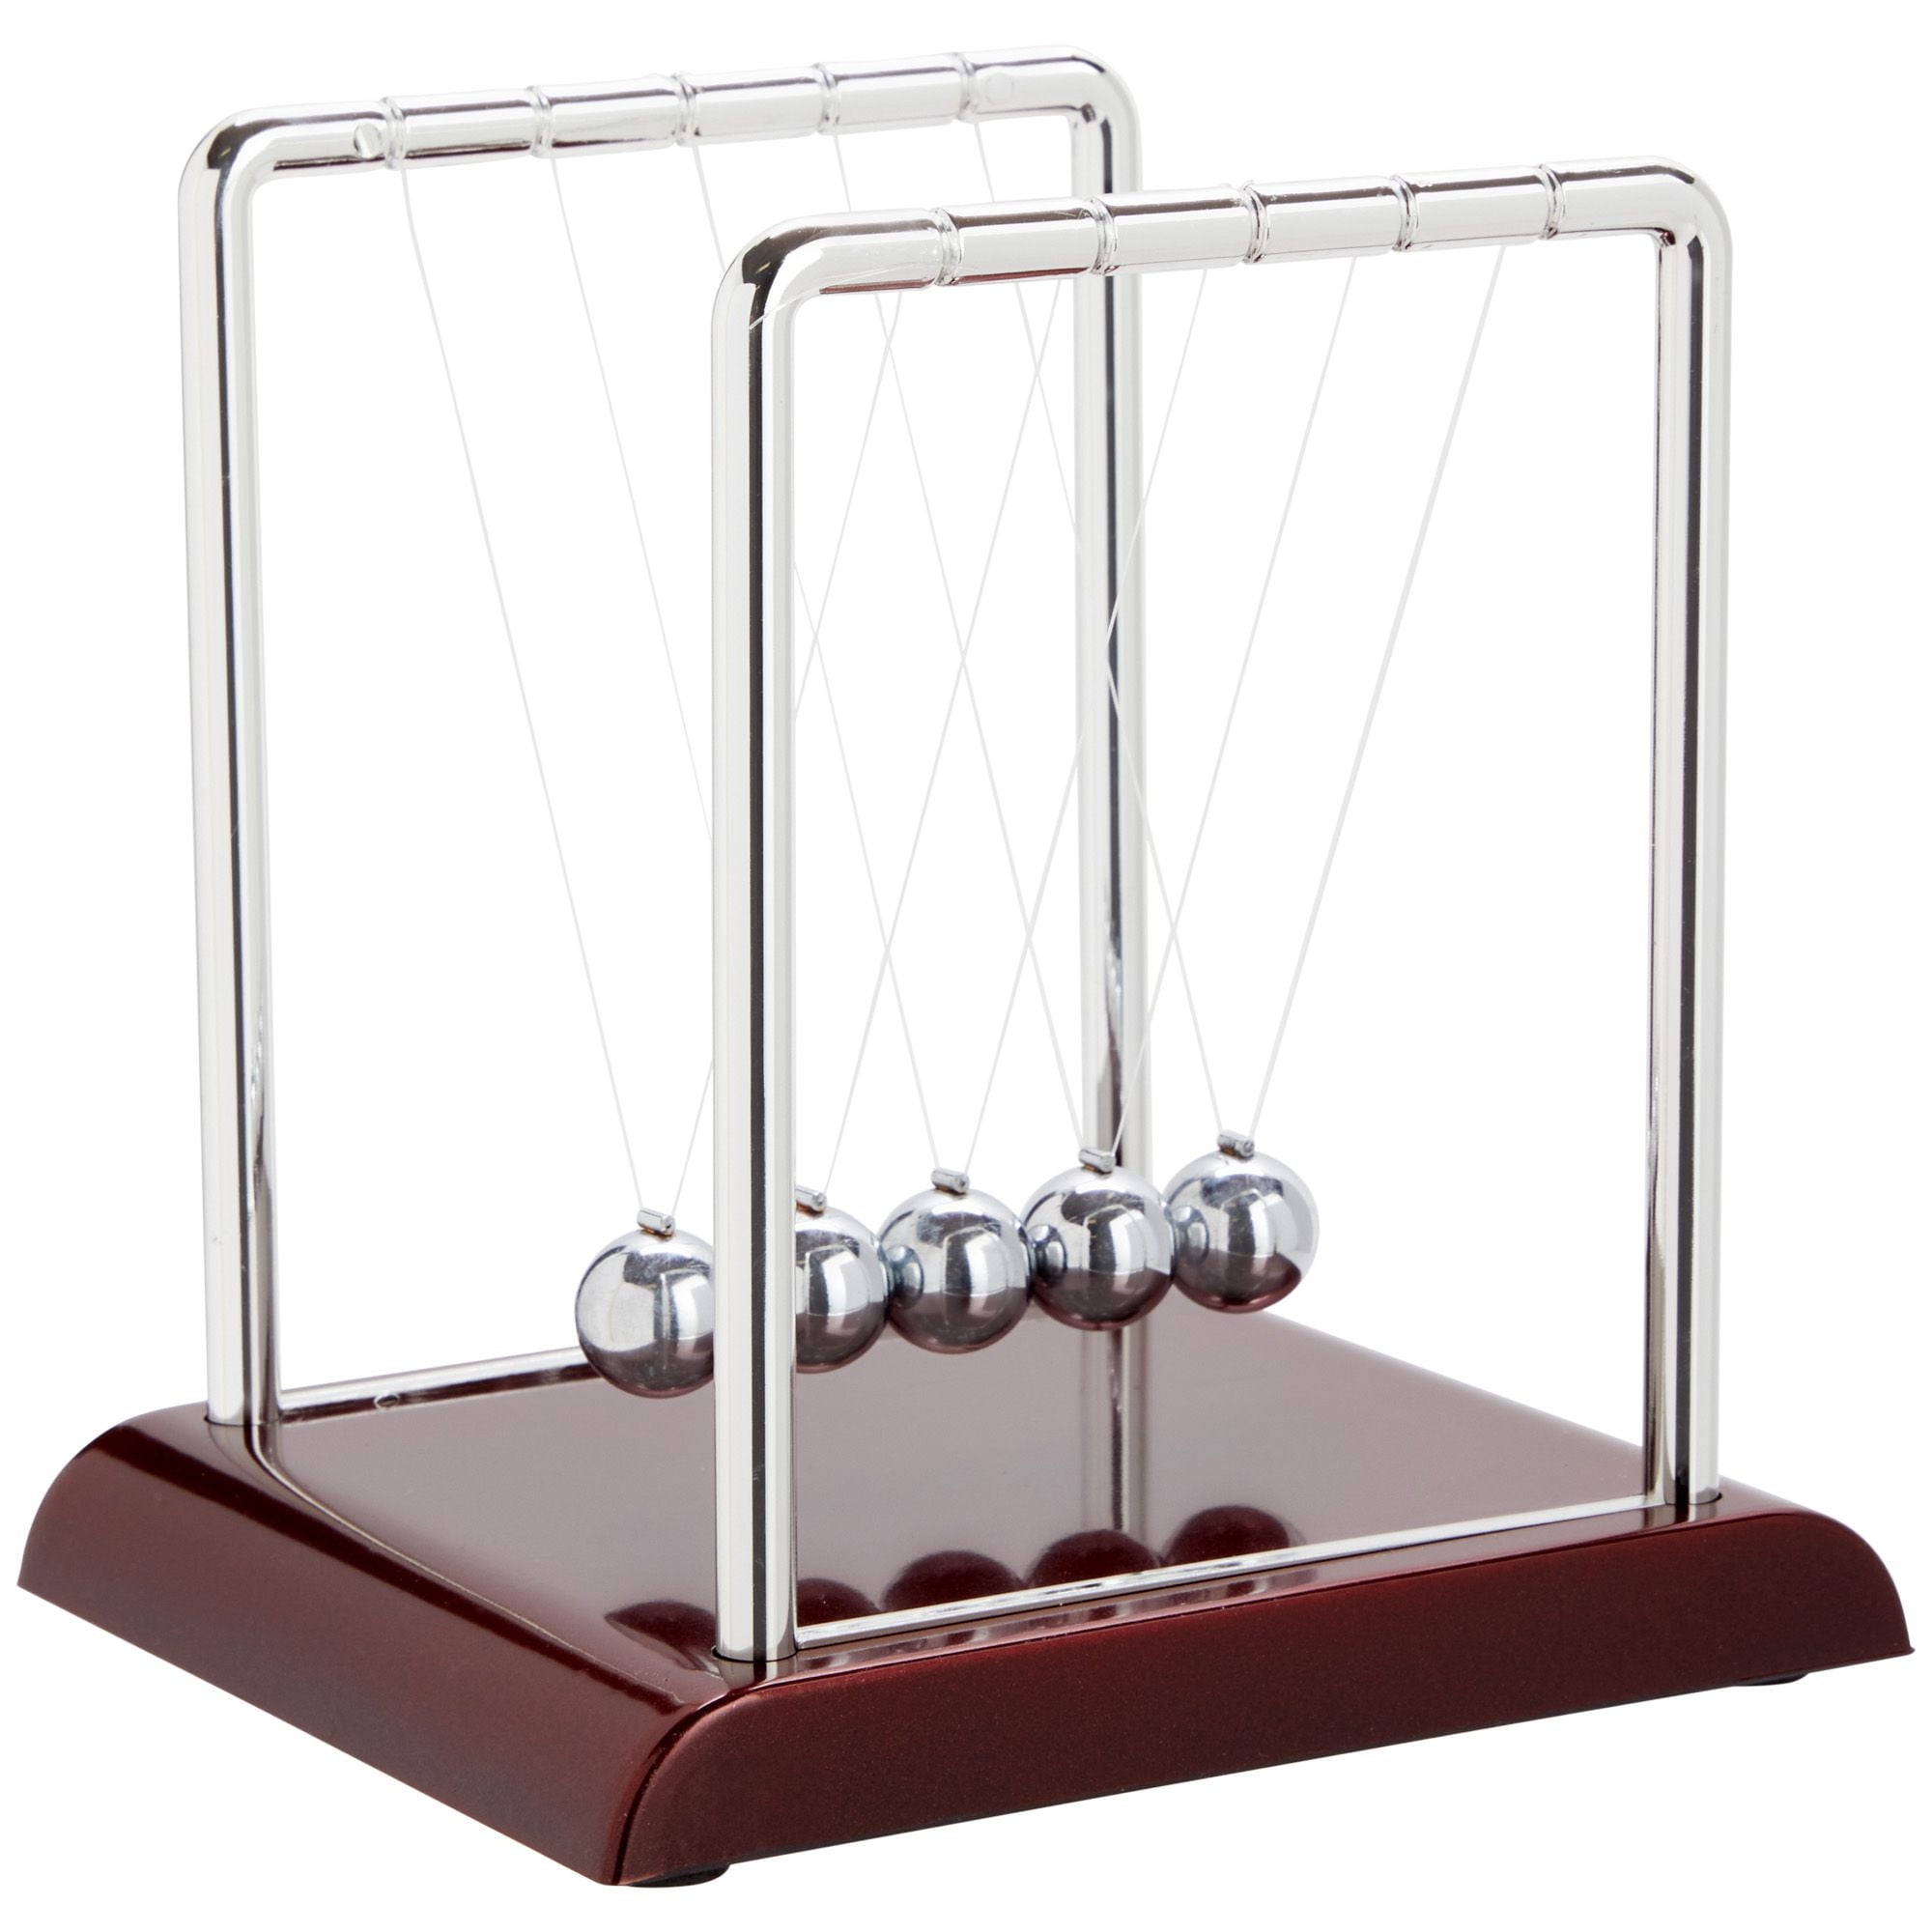 Desk Gadgets Perpetual Motion Desk Toy Durable Newtons Cradle Desk Toy  Physics Toys Desk Gadgets For Office Home